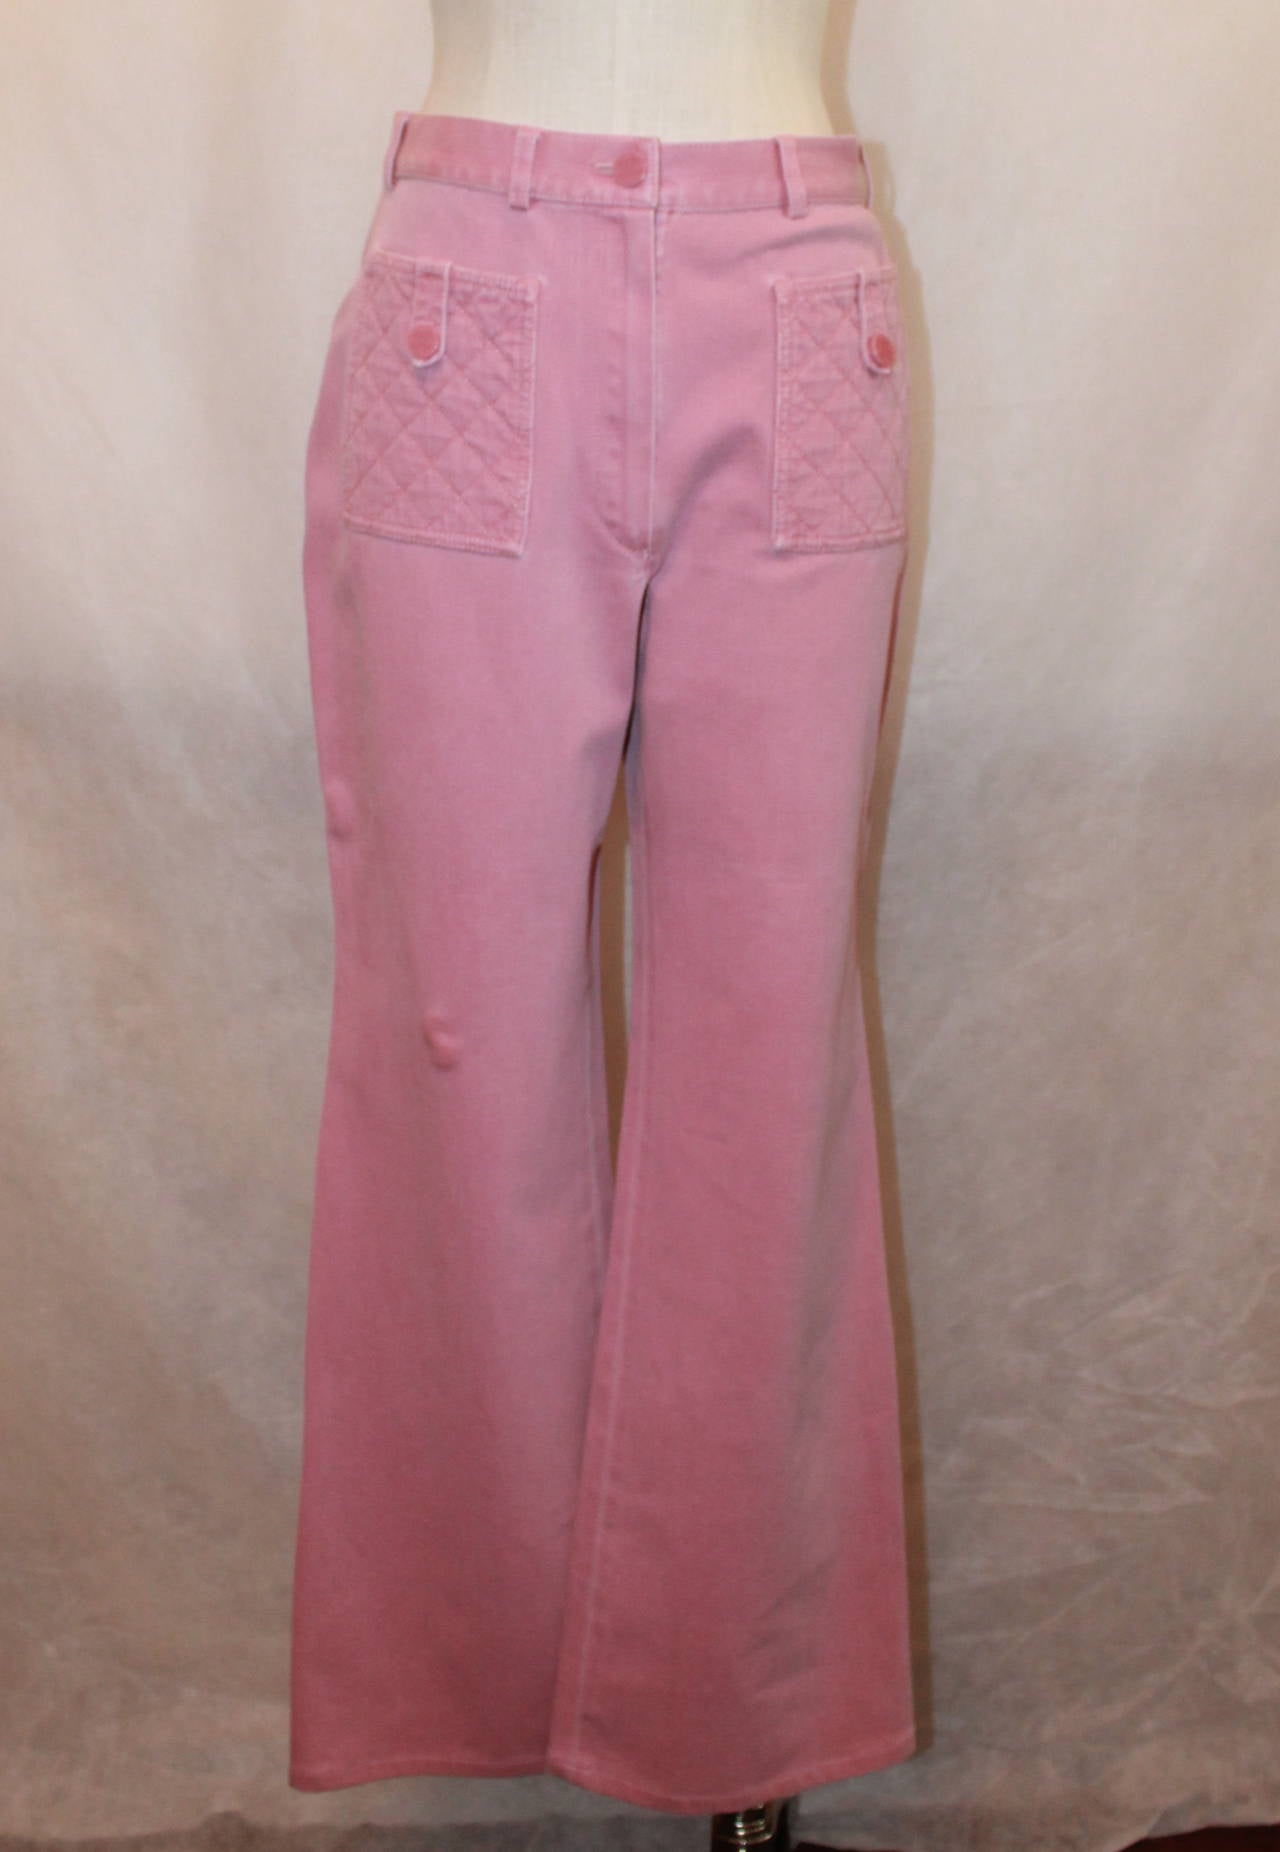 2004 Chanel Pink Flare Jeans with Quilted Front Pockets, no Back Pockets. Size 40.

Fabric:
93 % Cotton
7 % Spandex

Measurements:
Waist: 29 